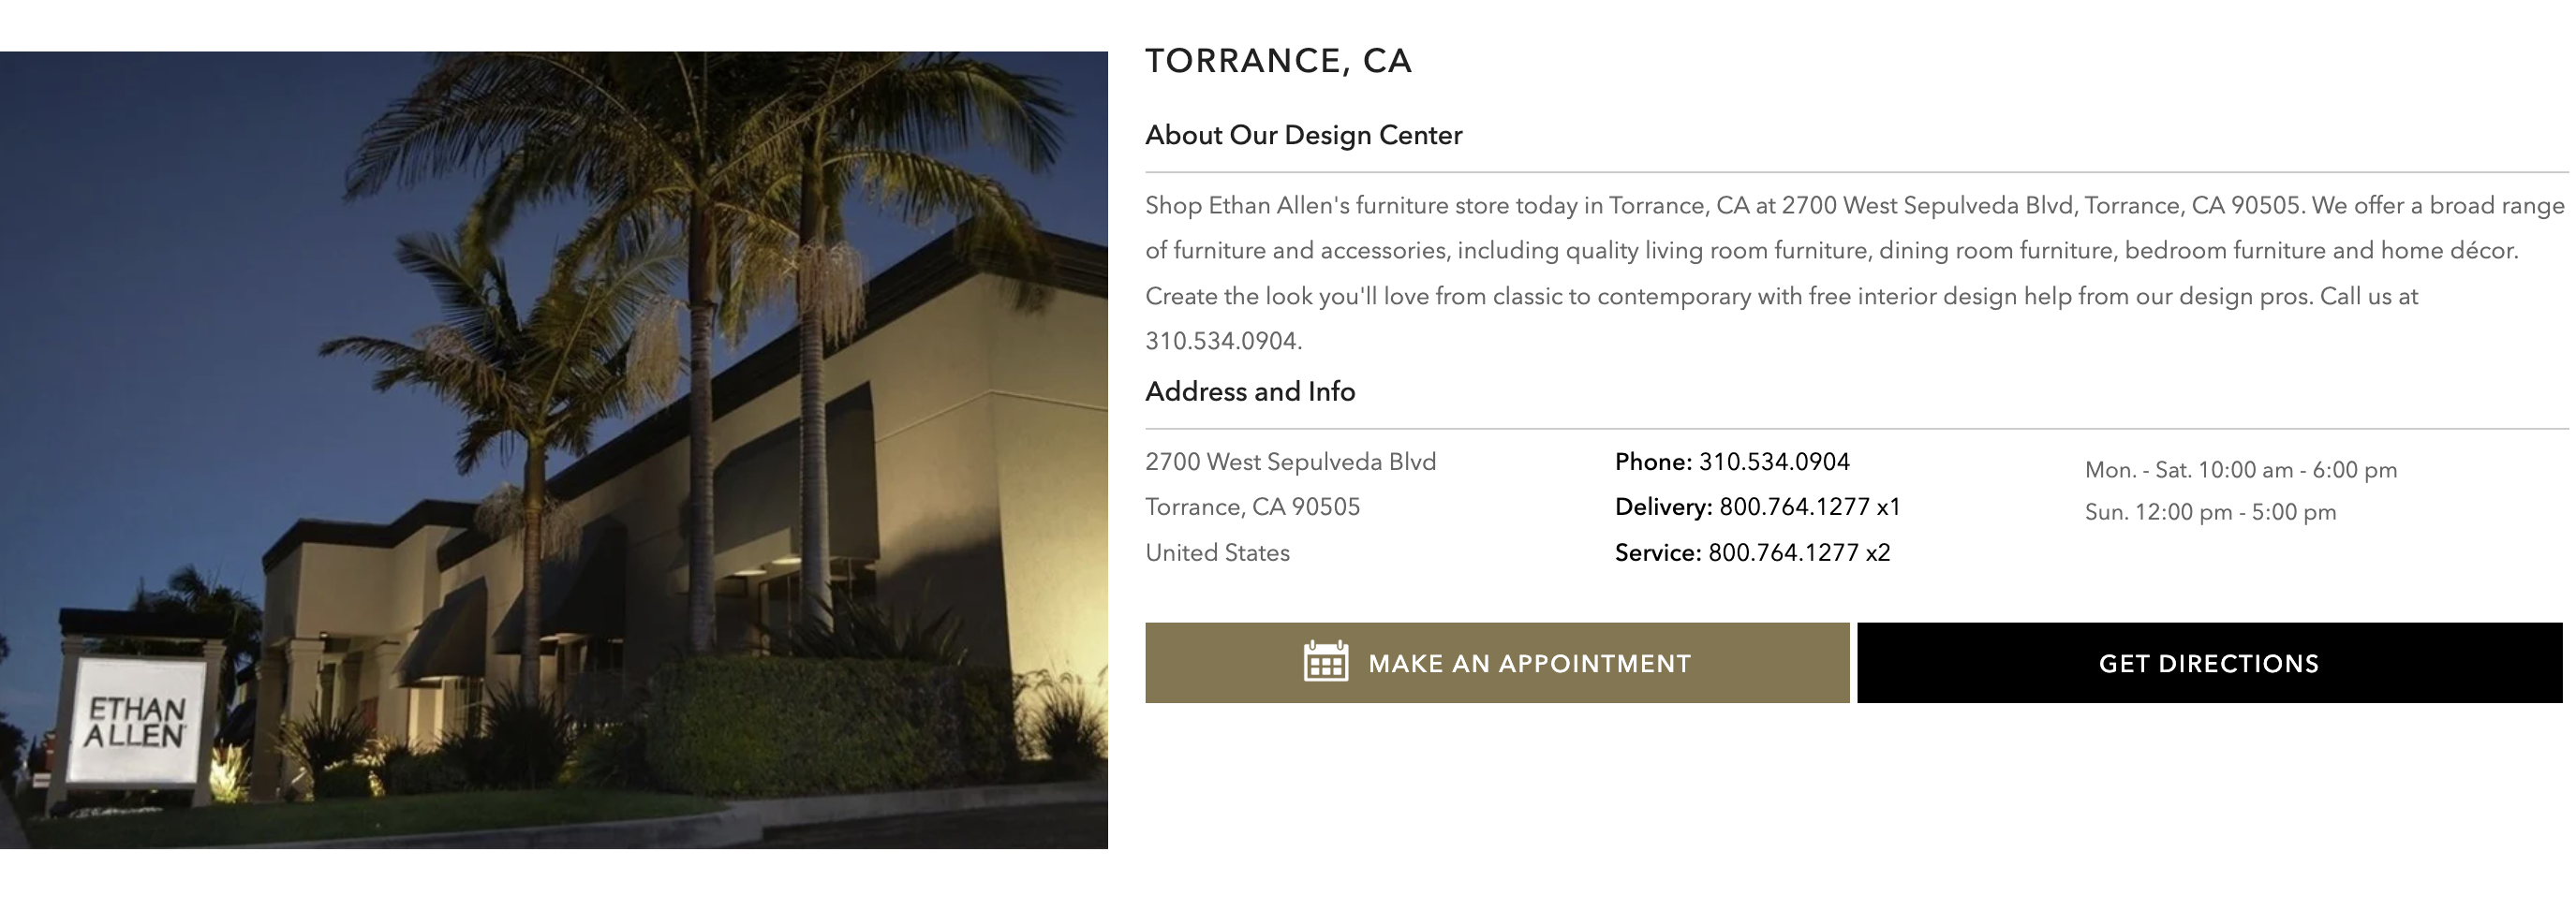 Ethan Allen's Torrance, CA location webpage design with details about the business, NAP info, hours, driving directions, photo of the location, and book an appointment CTA